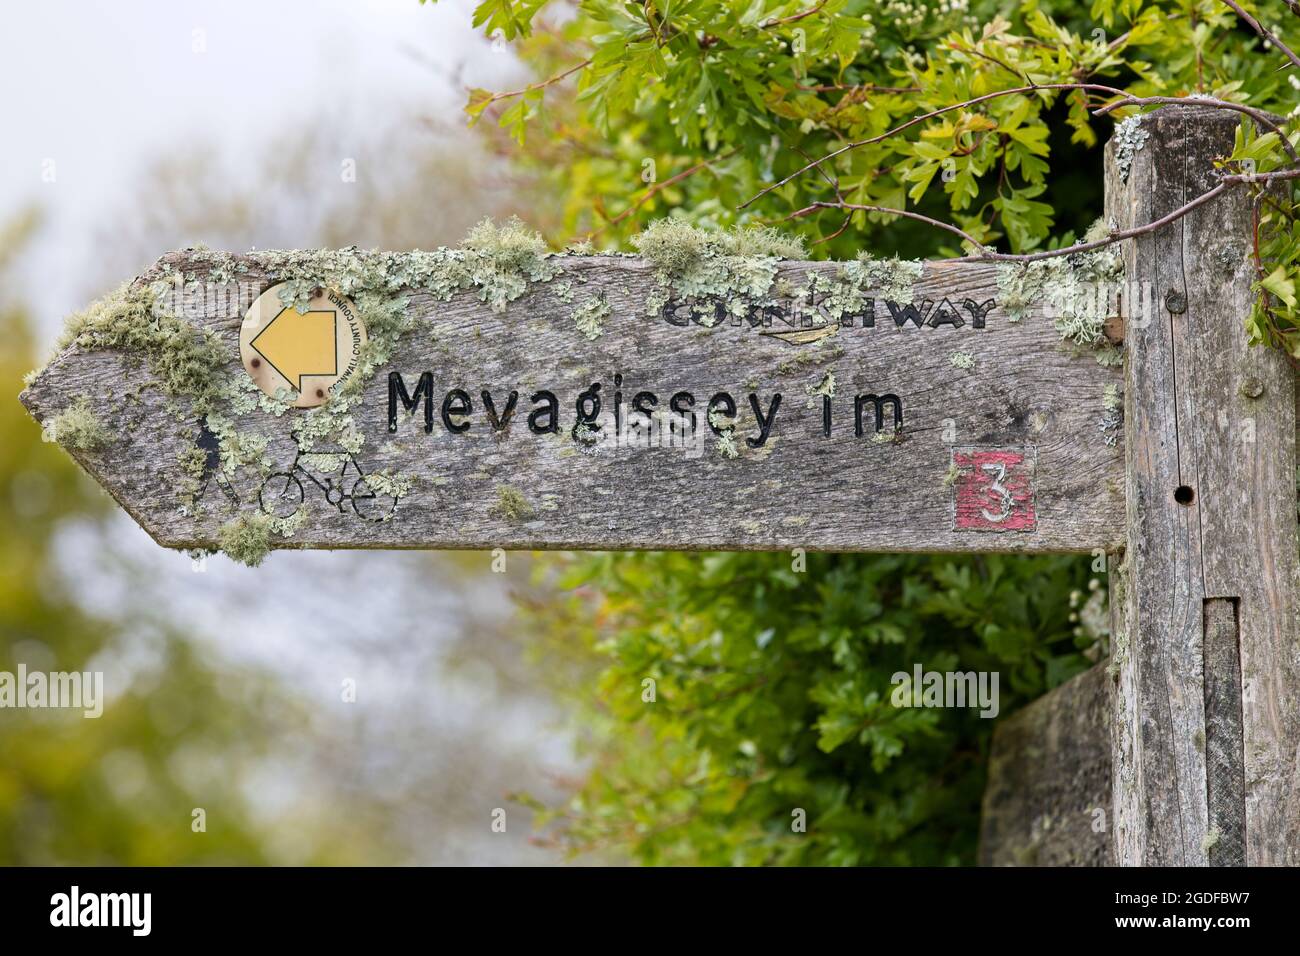 A lichen-covered 'Cornish Way' signpost one mile from Mevagissey, Cornwall, England, UK. Stock Photo